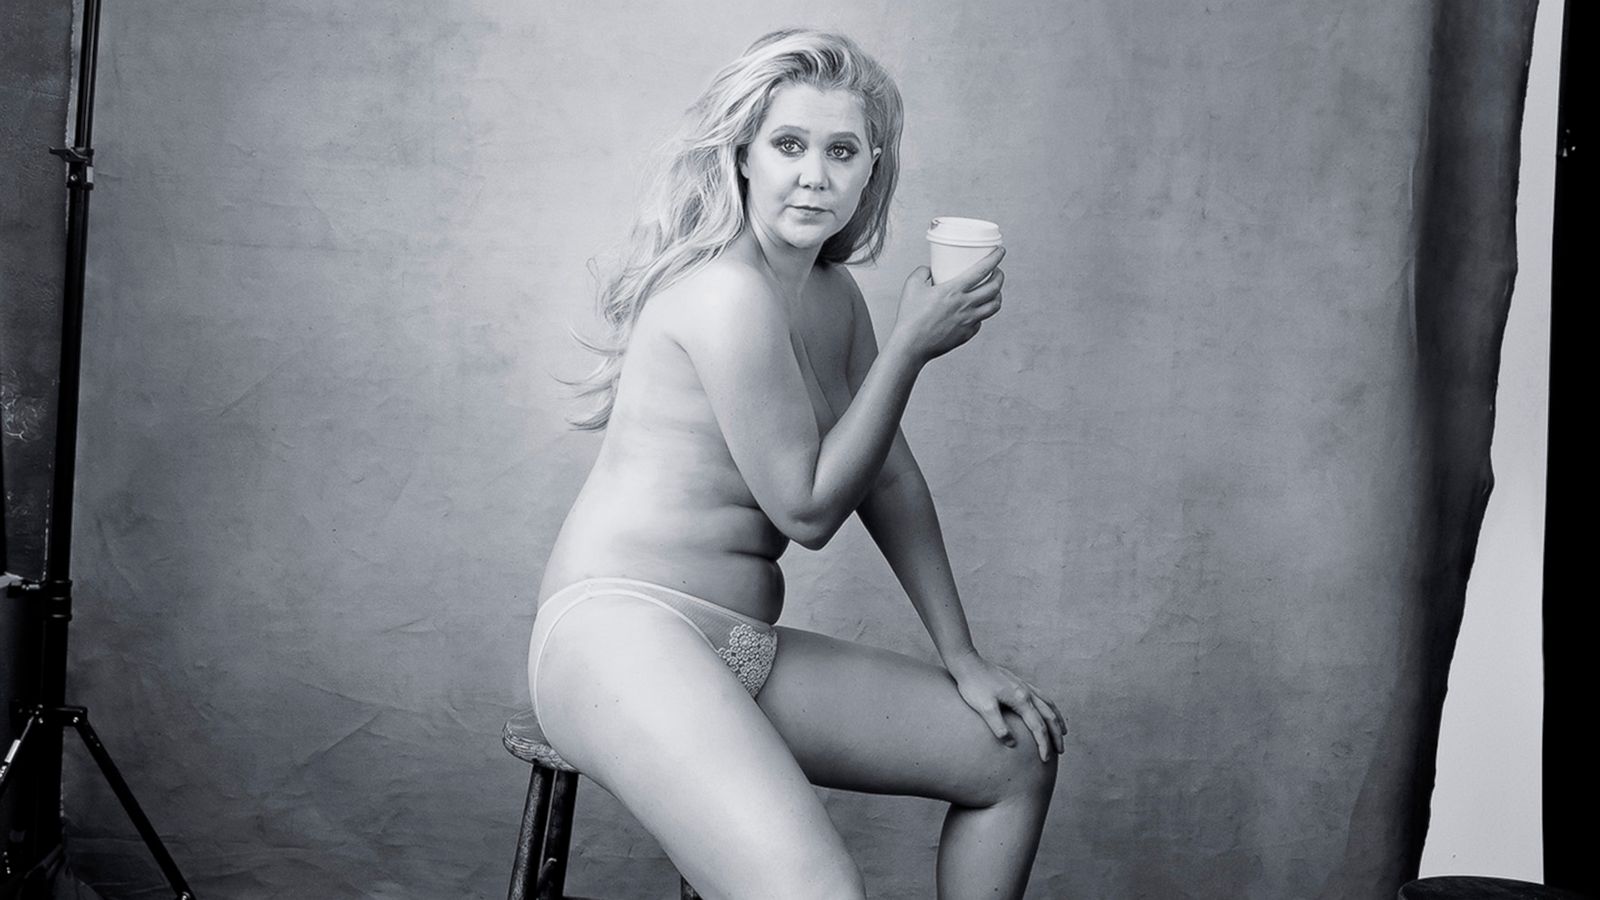 calvin marquicias add amy schumer poses topless photo